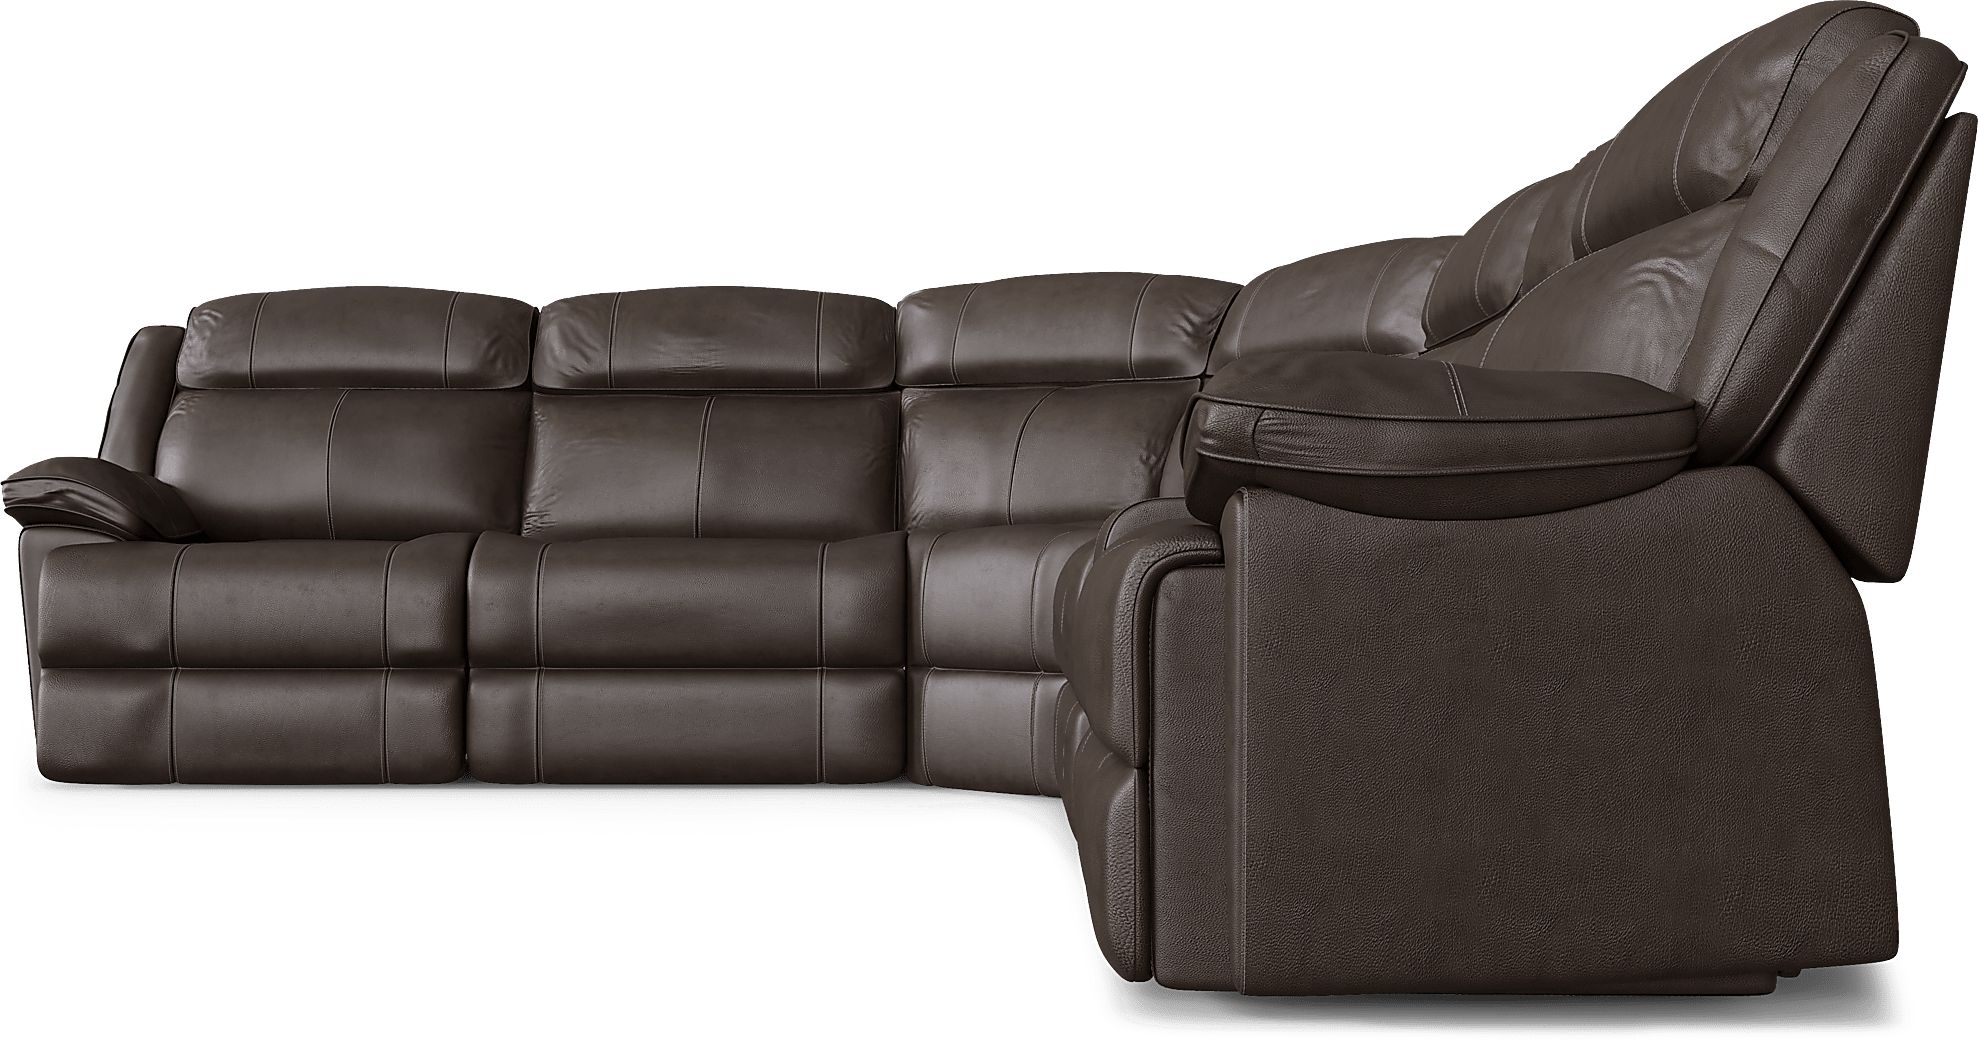 West Valley Brown 6 Pc Leather Reclining Sectional